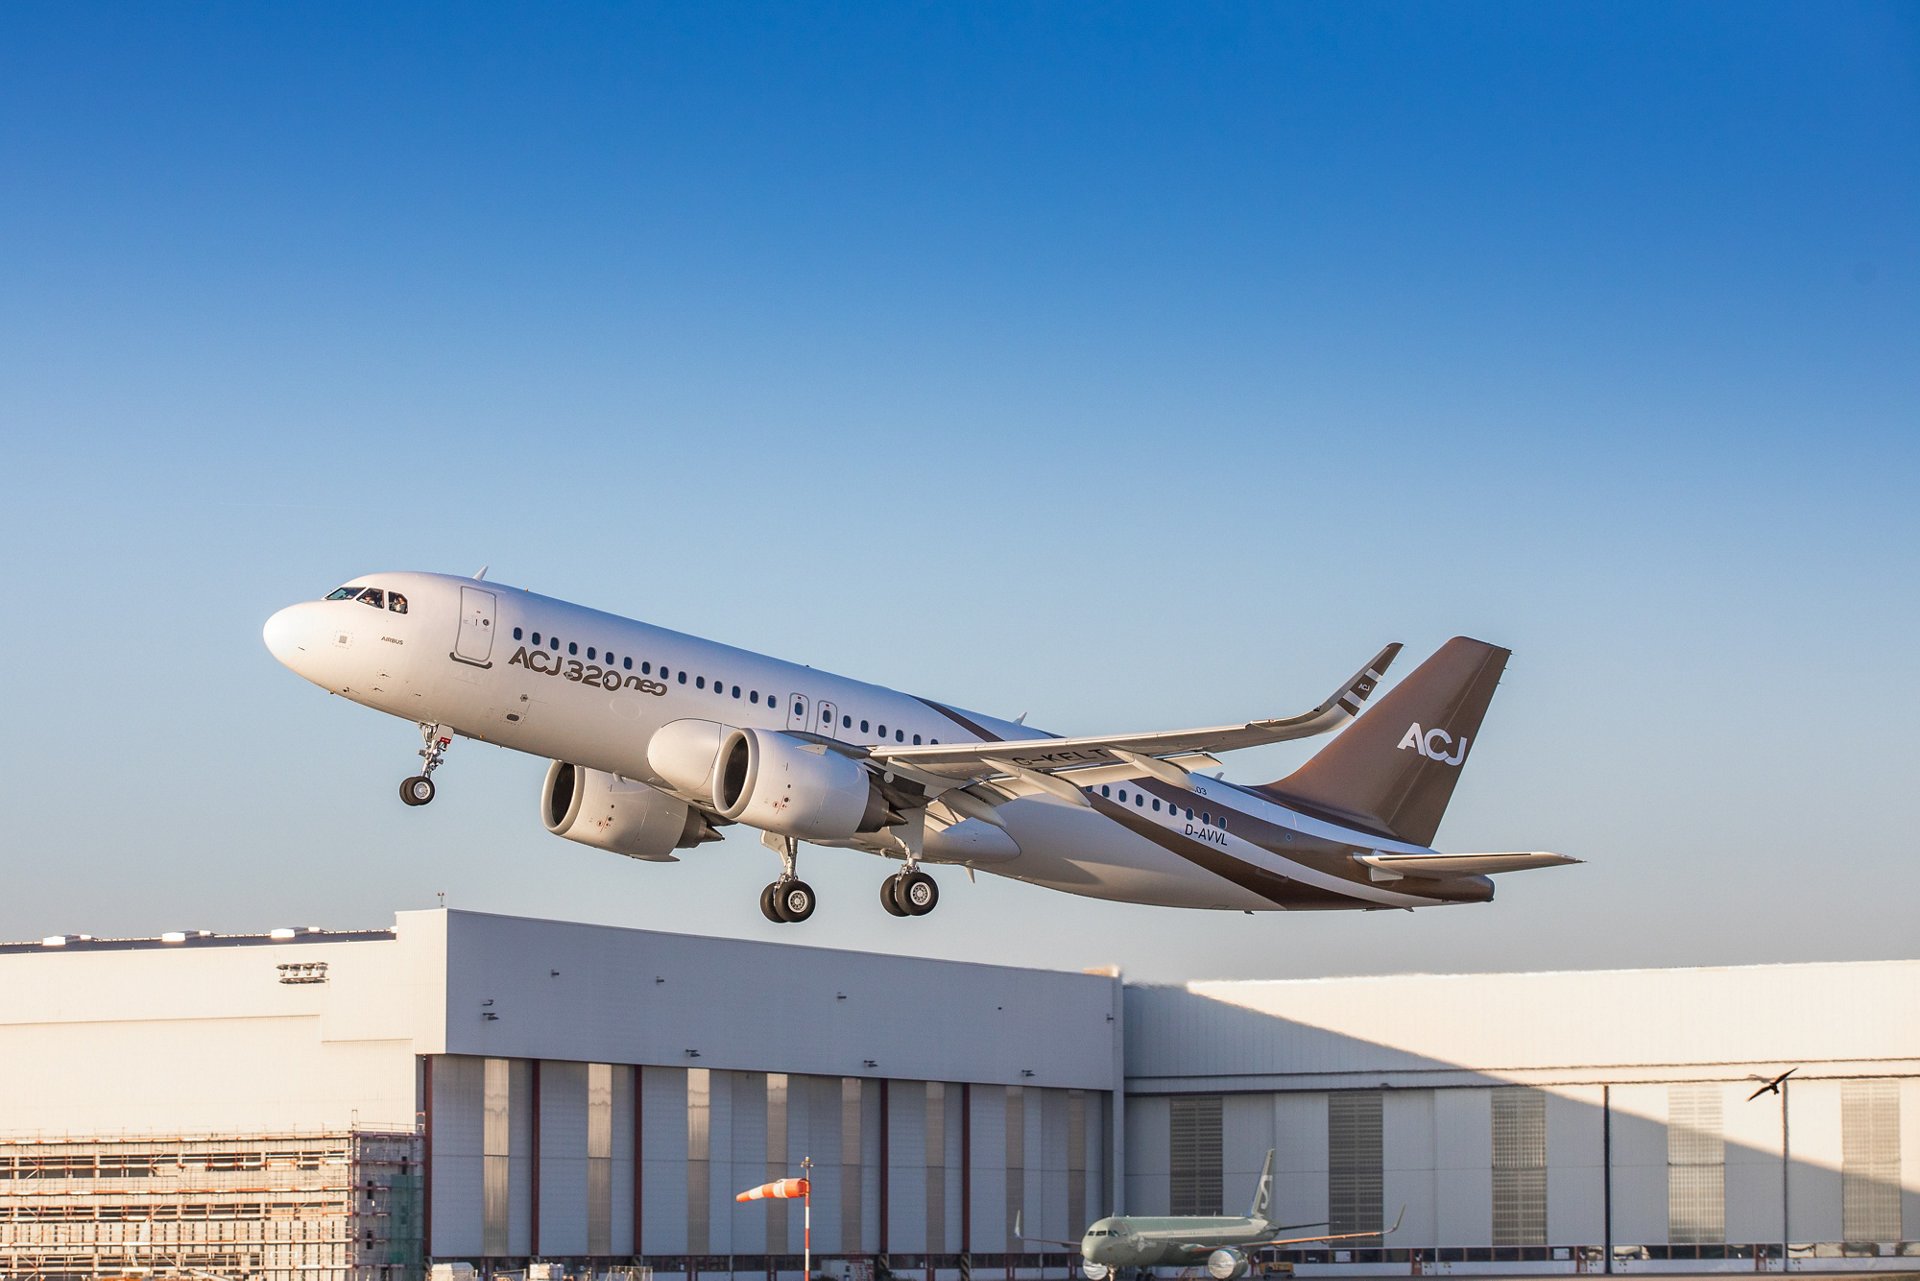 ACJ320neo takes to the skies for the first time